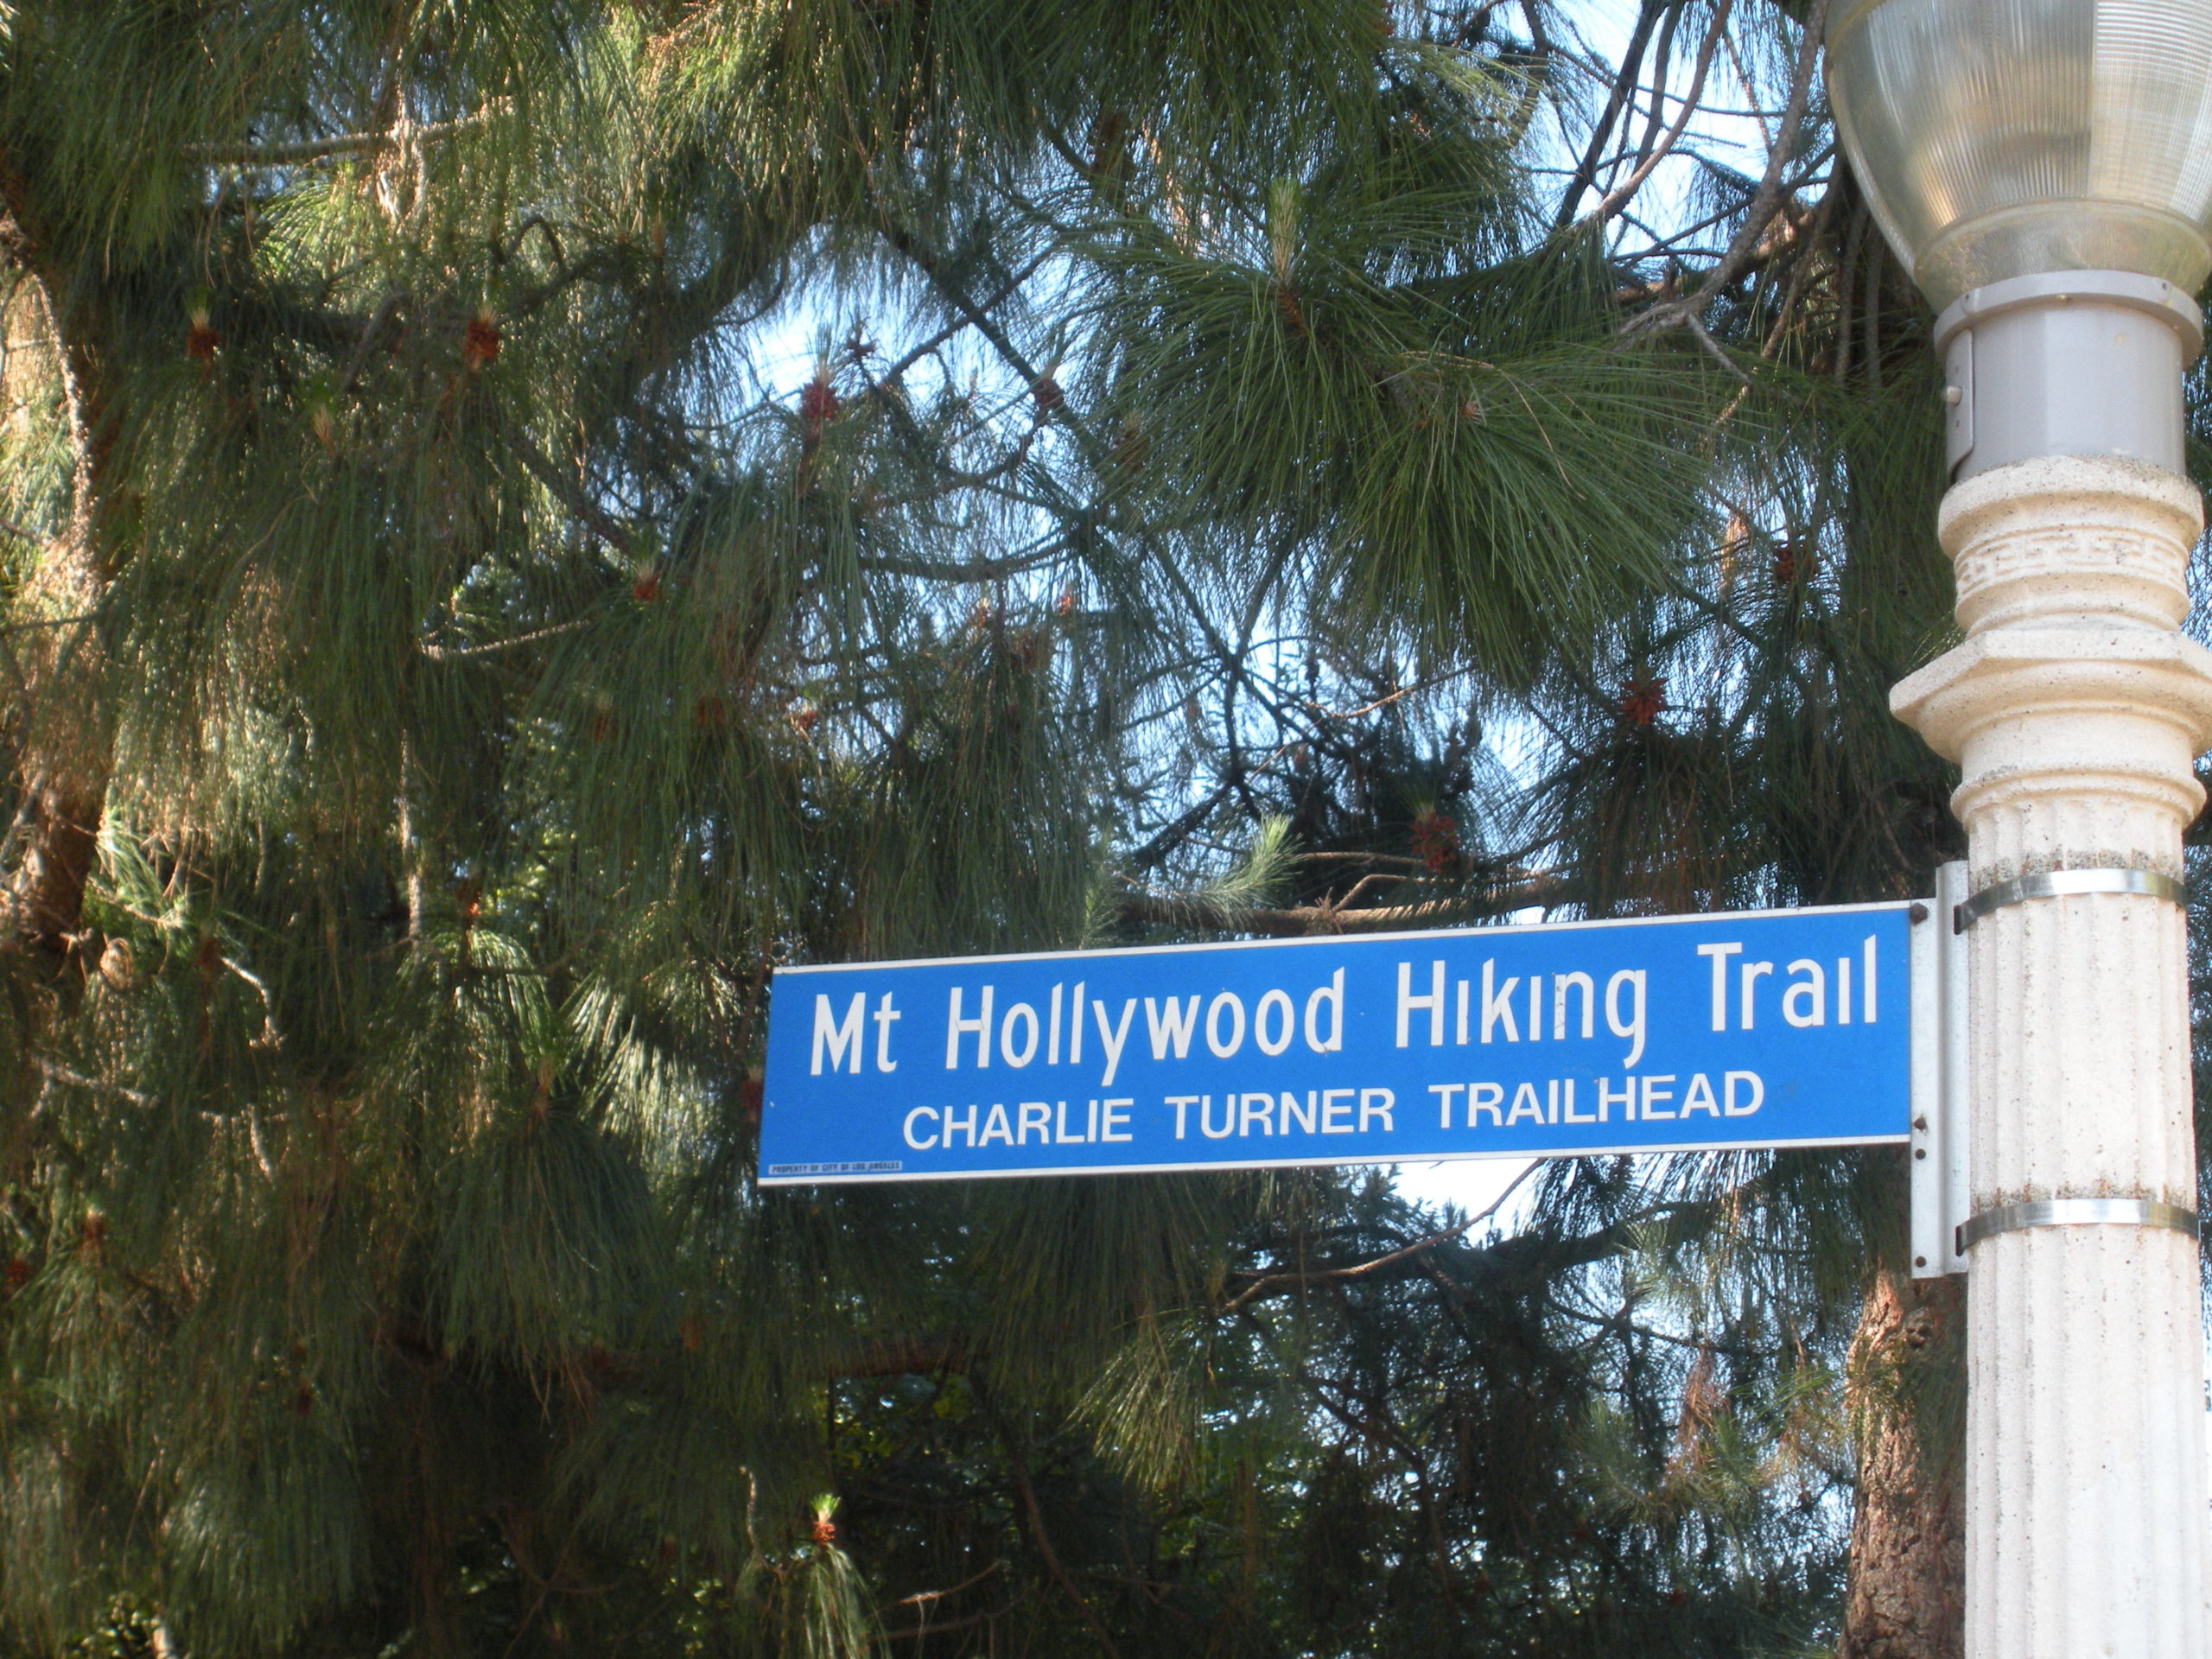 Mount Hollywood Trail from Griffith Observatory